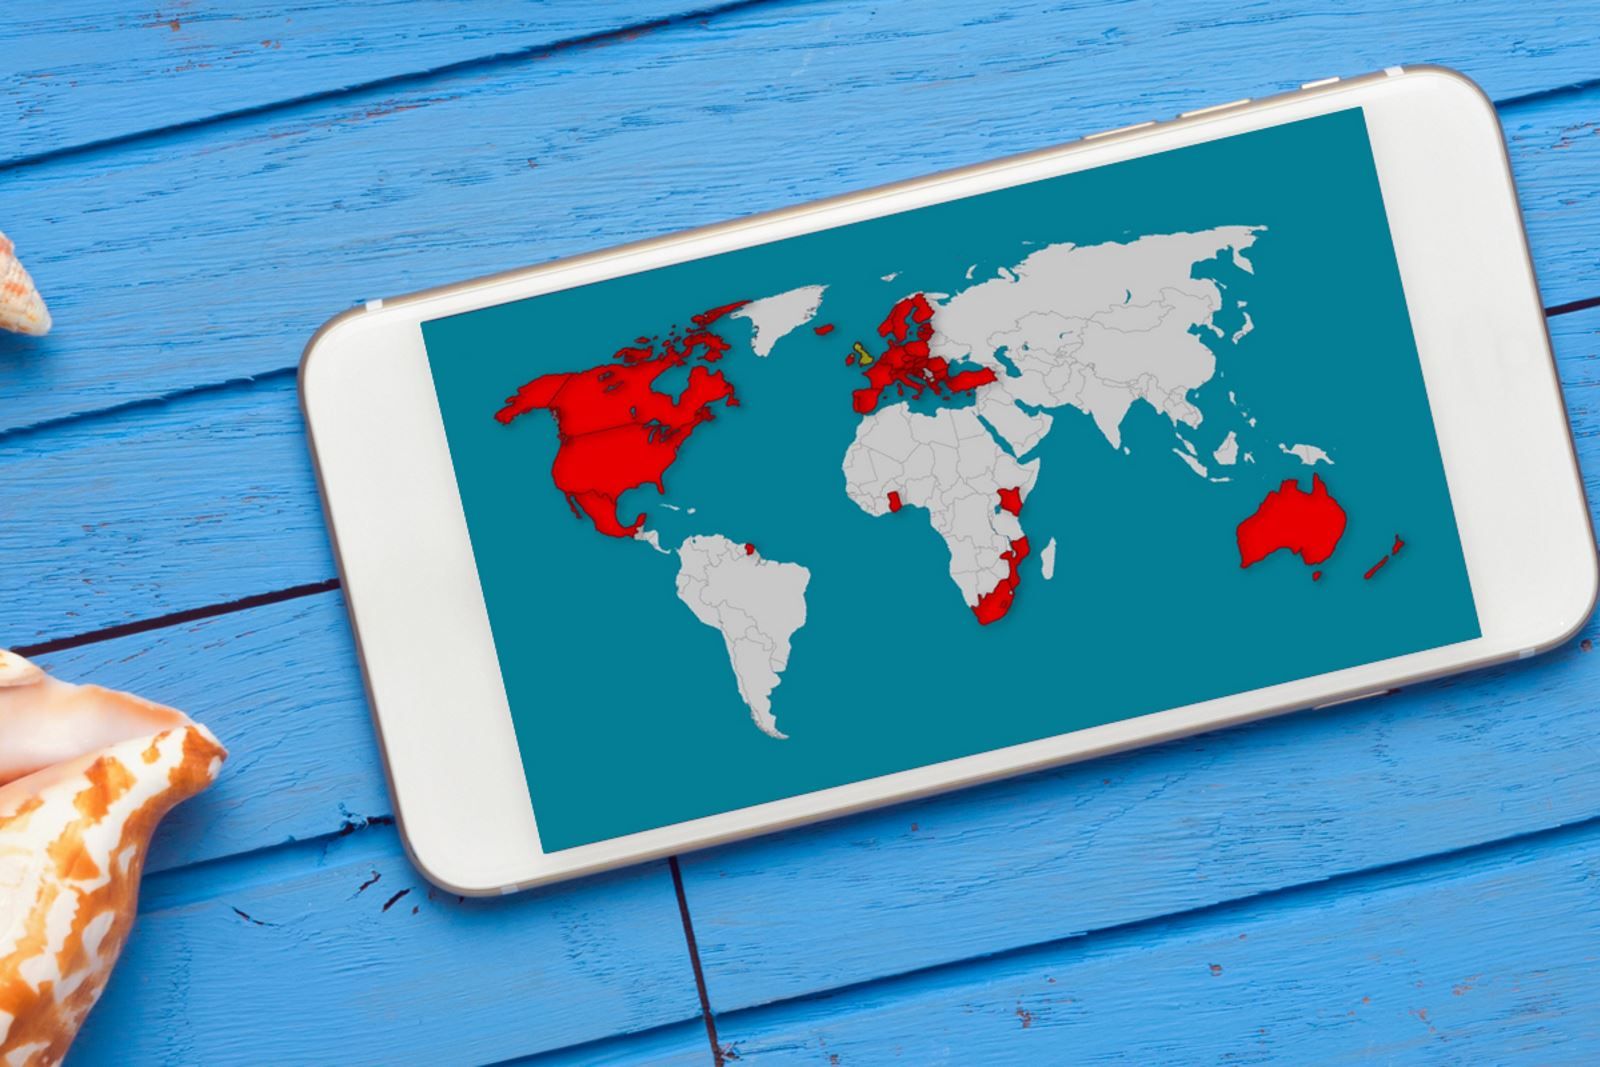 Vodafone free roaming now in 29 more countries image 1